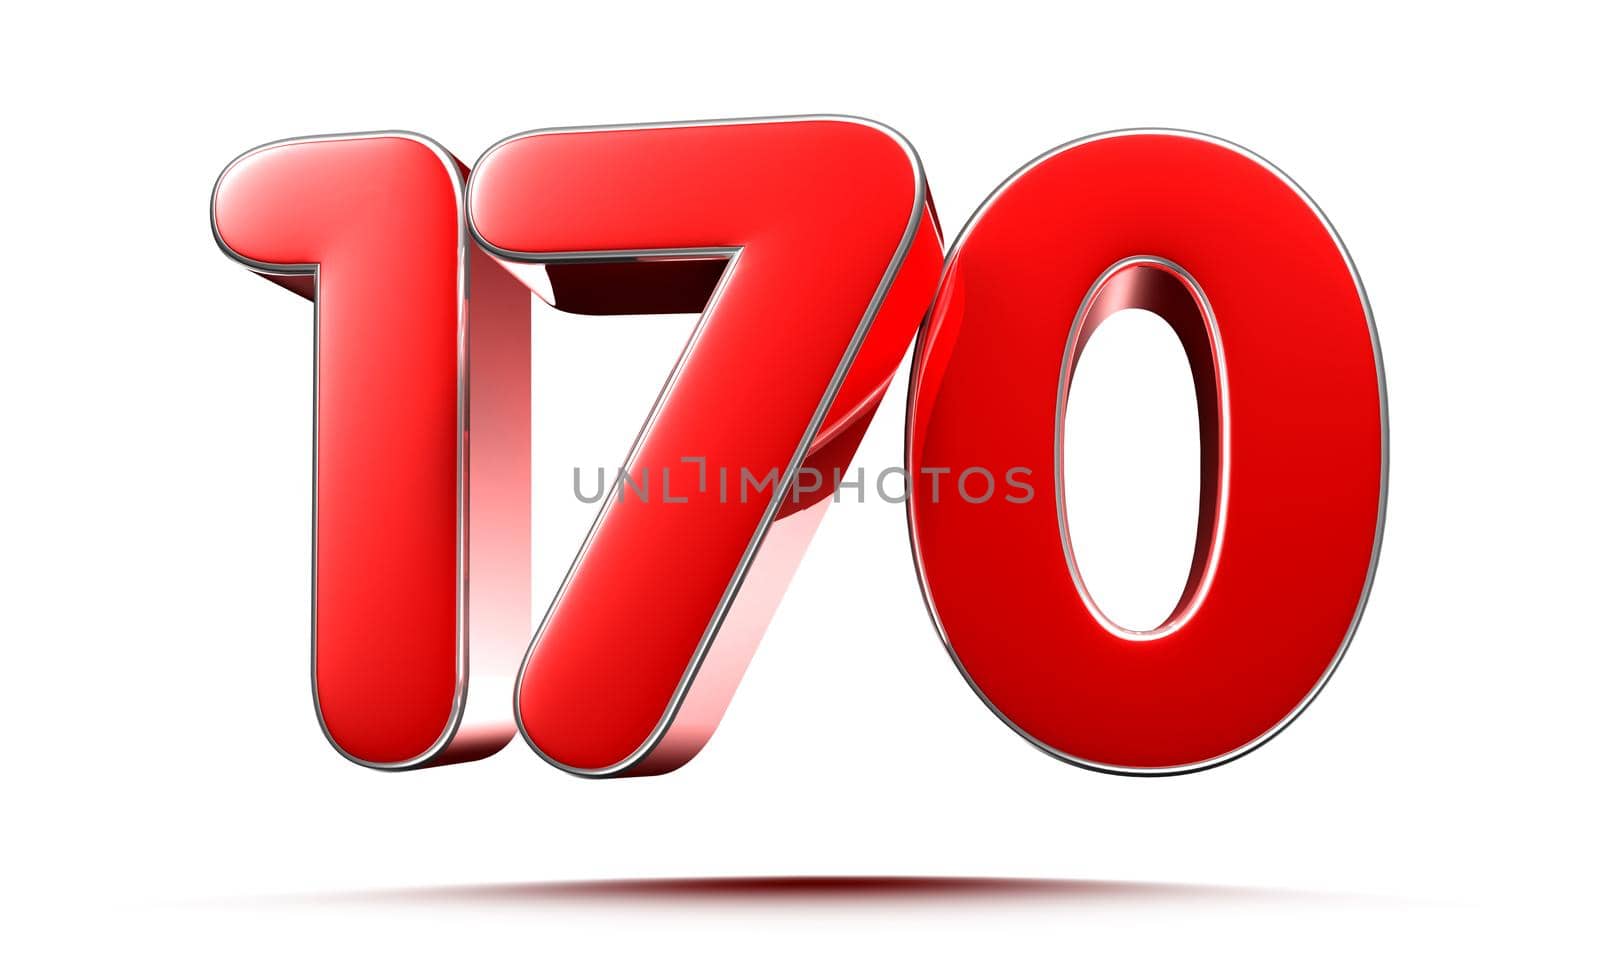 Rounded red numbers 170 on white background 3D illustration with clipping path by thitimontoyai